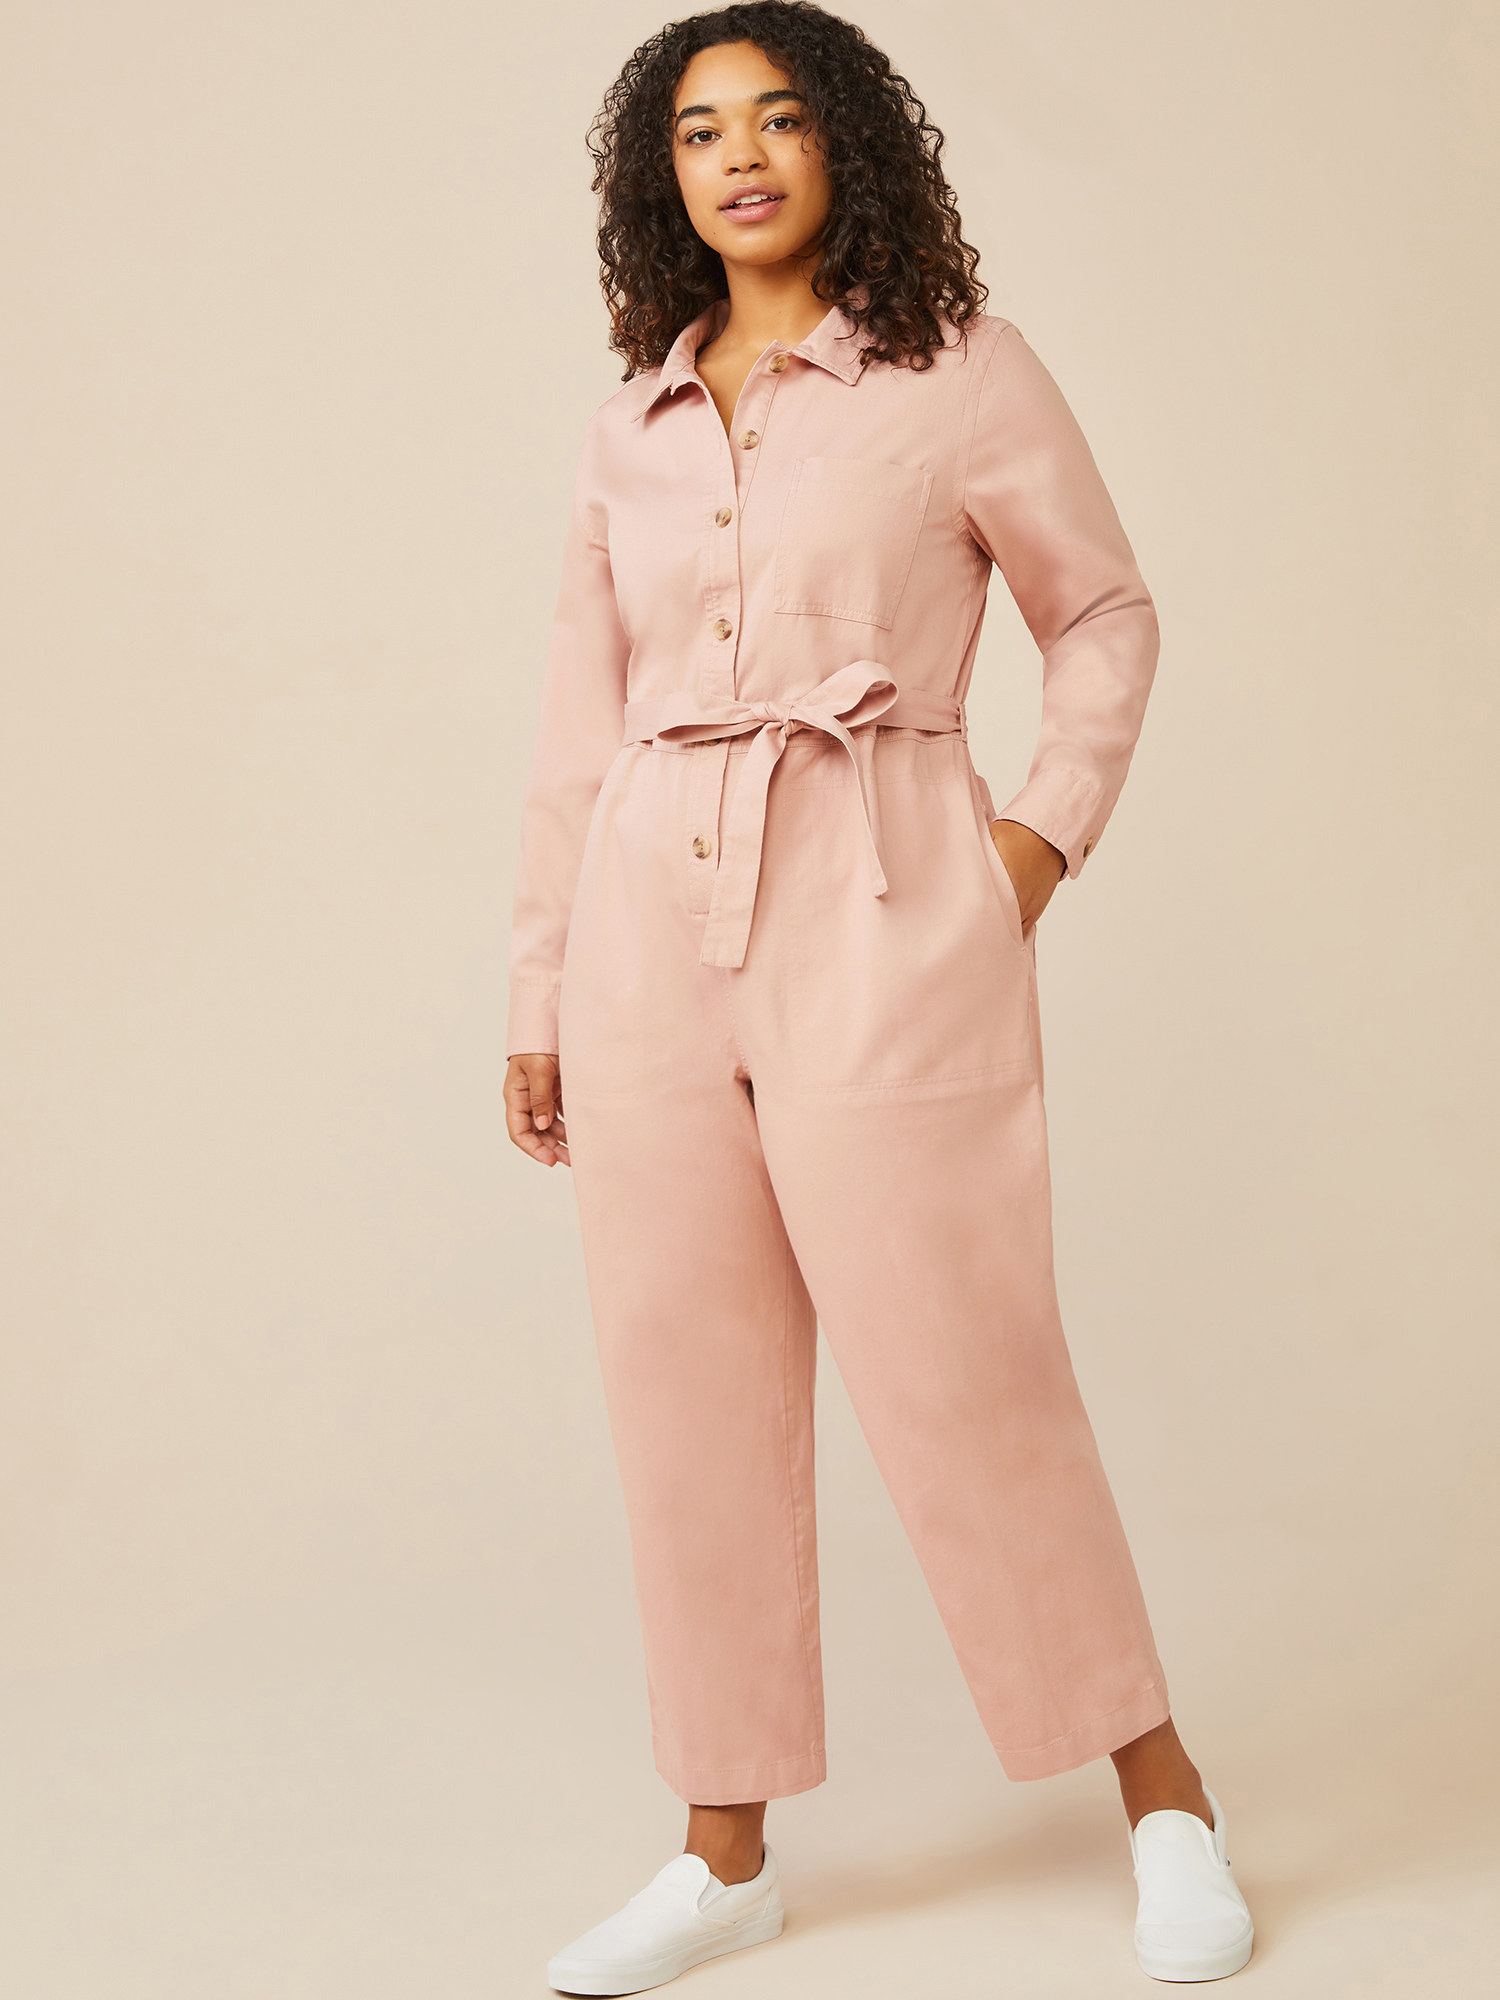 model wearing the pastel pink coverall